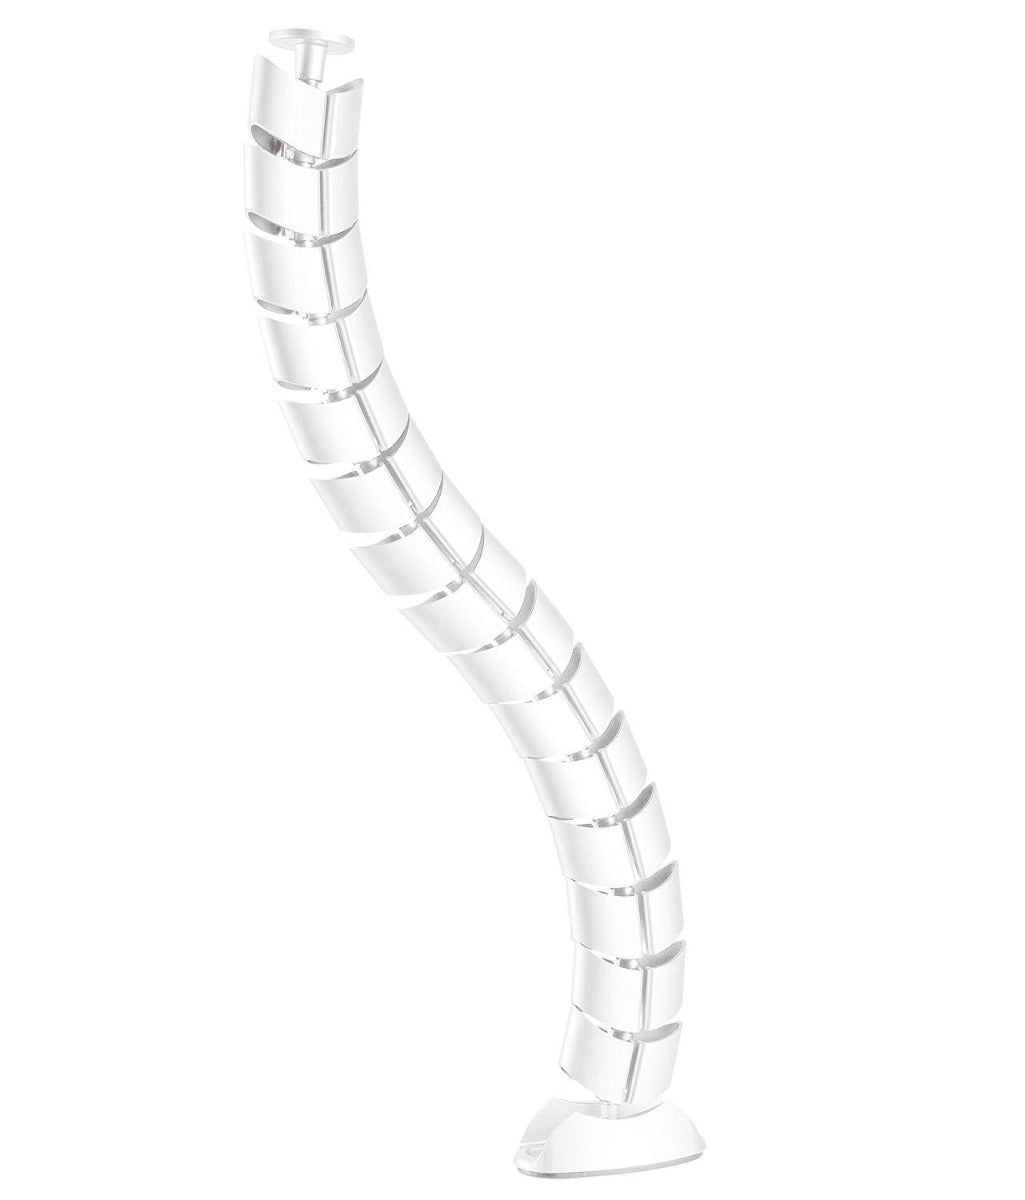 Cable Management Spine in White - OOF-P09 UK